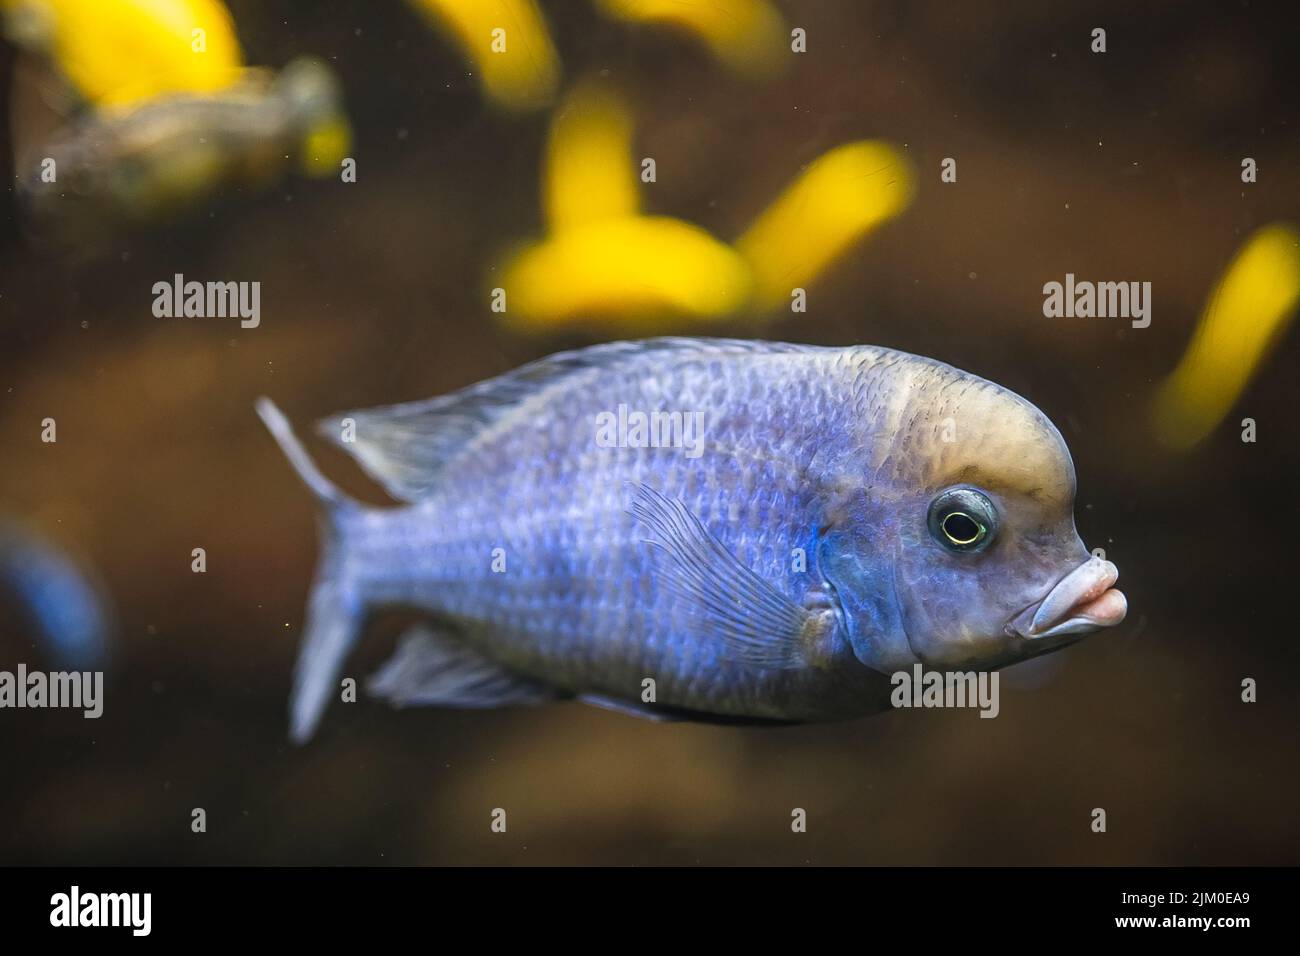 A closeup shot of an African cichlid fish swimming underwater Stock Photo